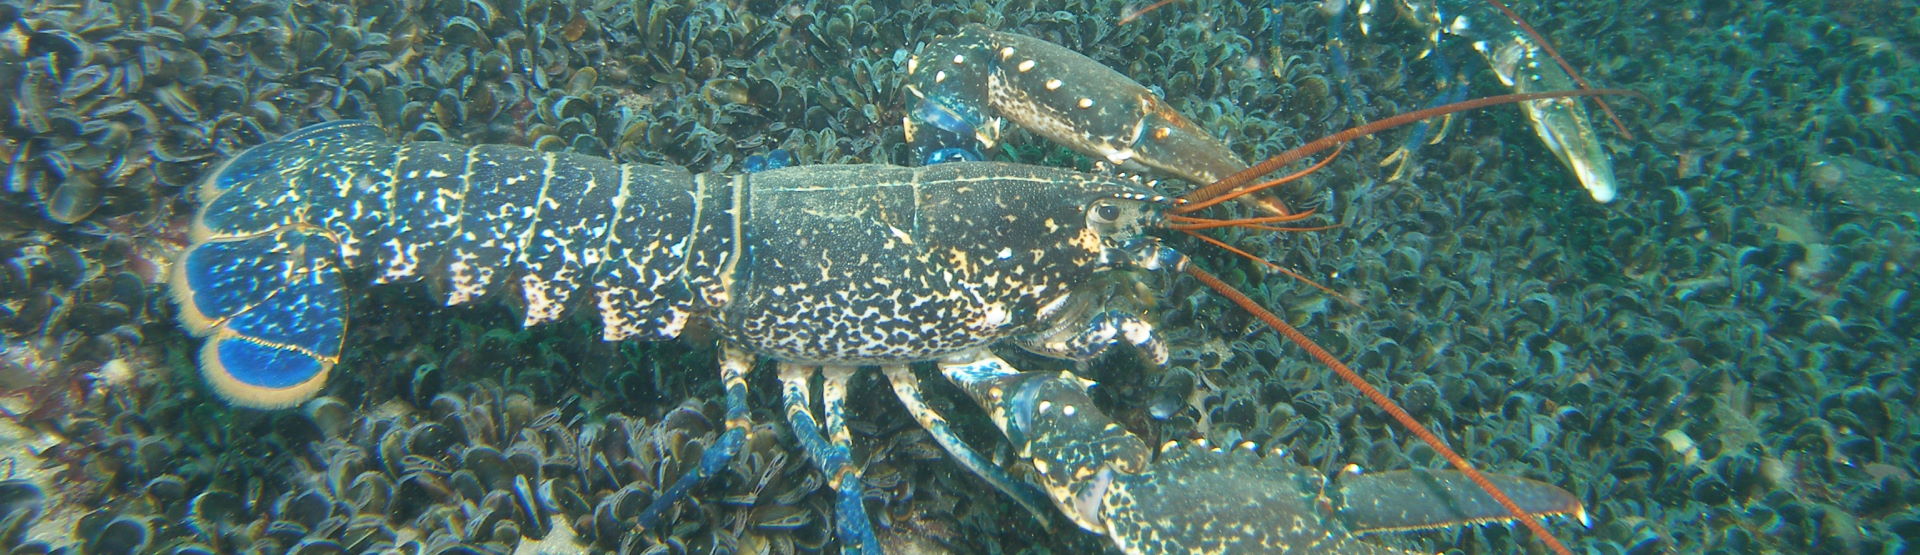 Common Lobster on mussel bed (Seasearch - David Kipling)